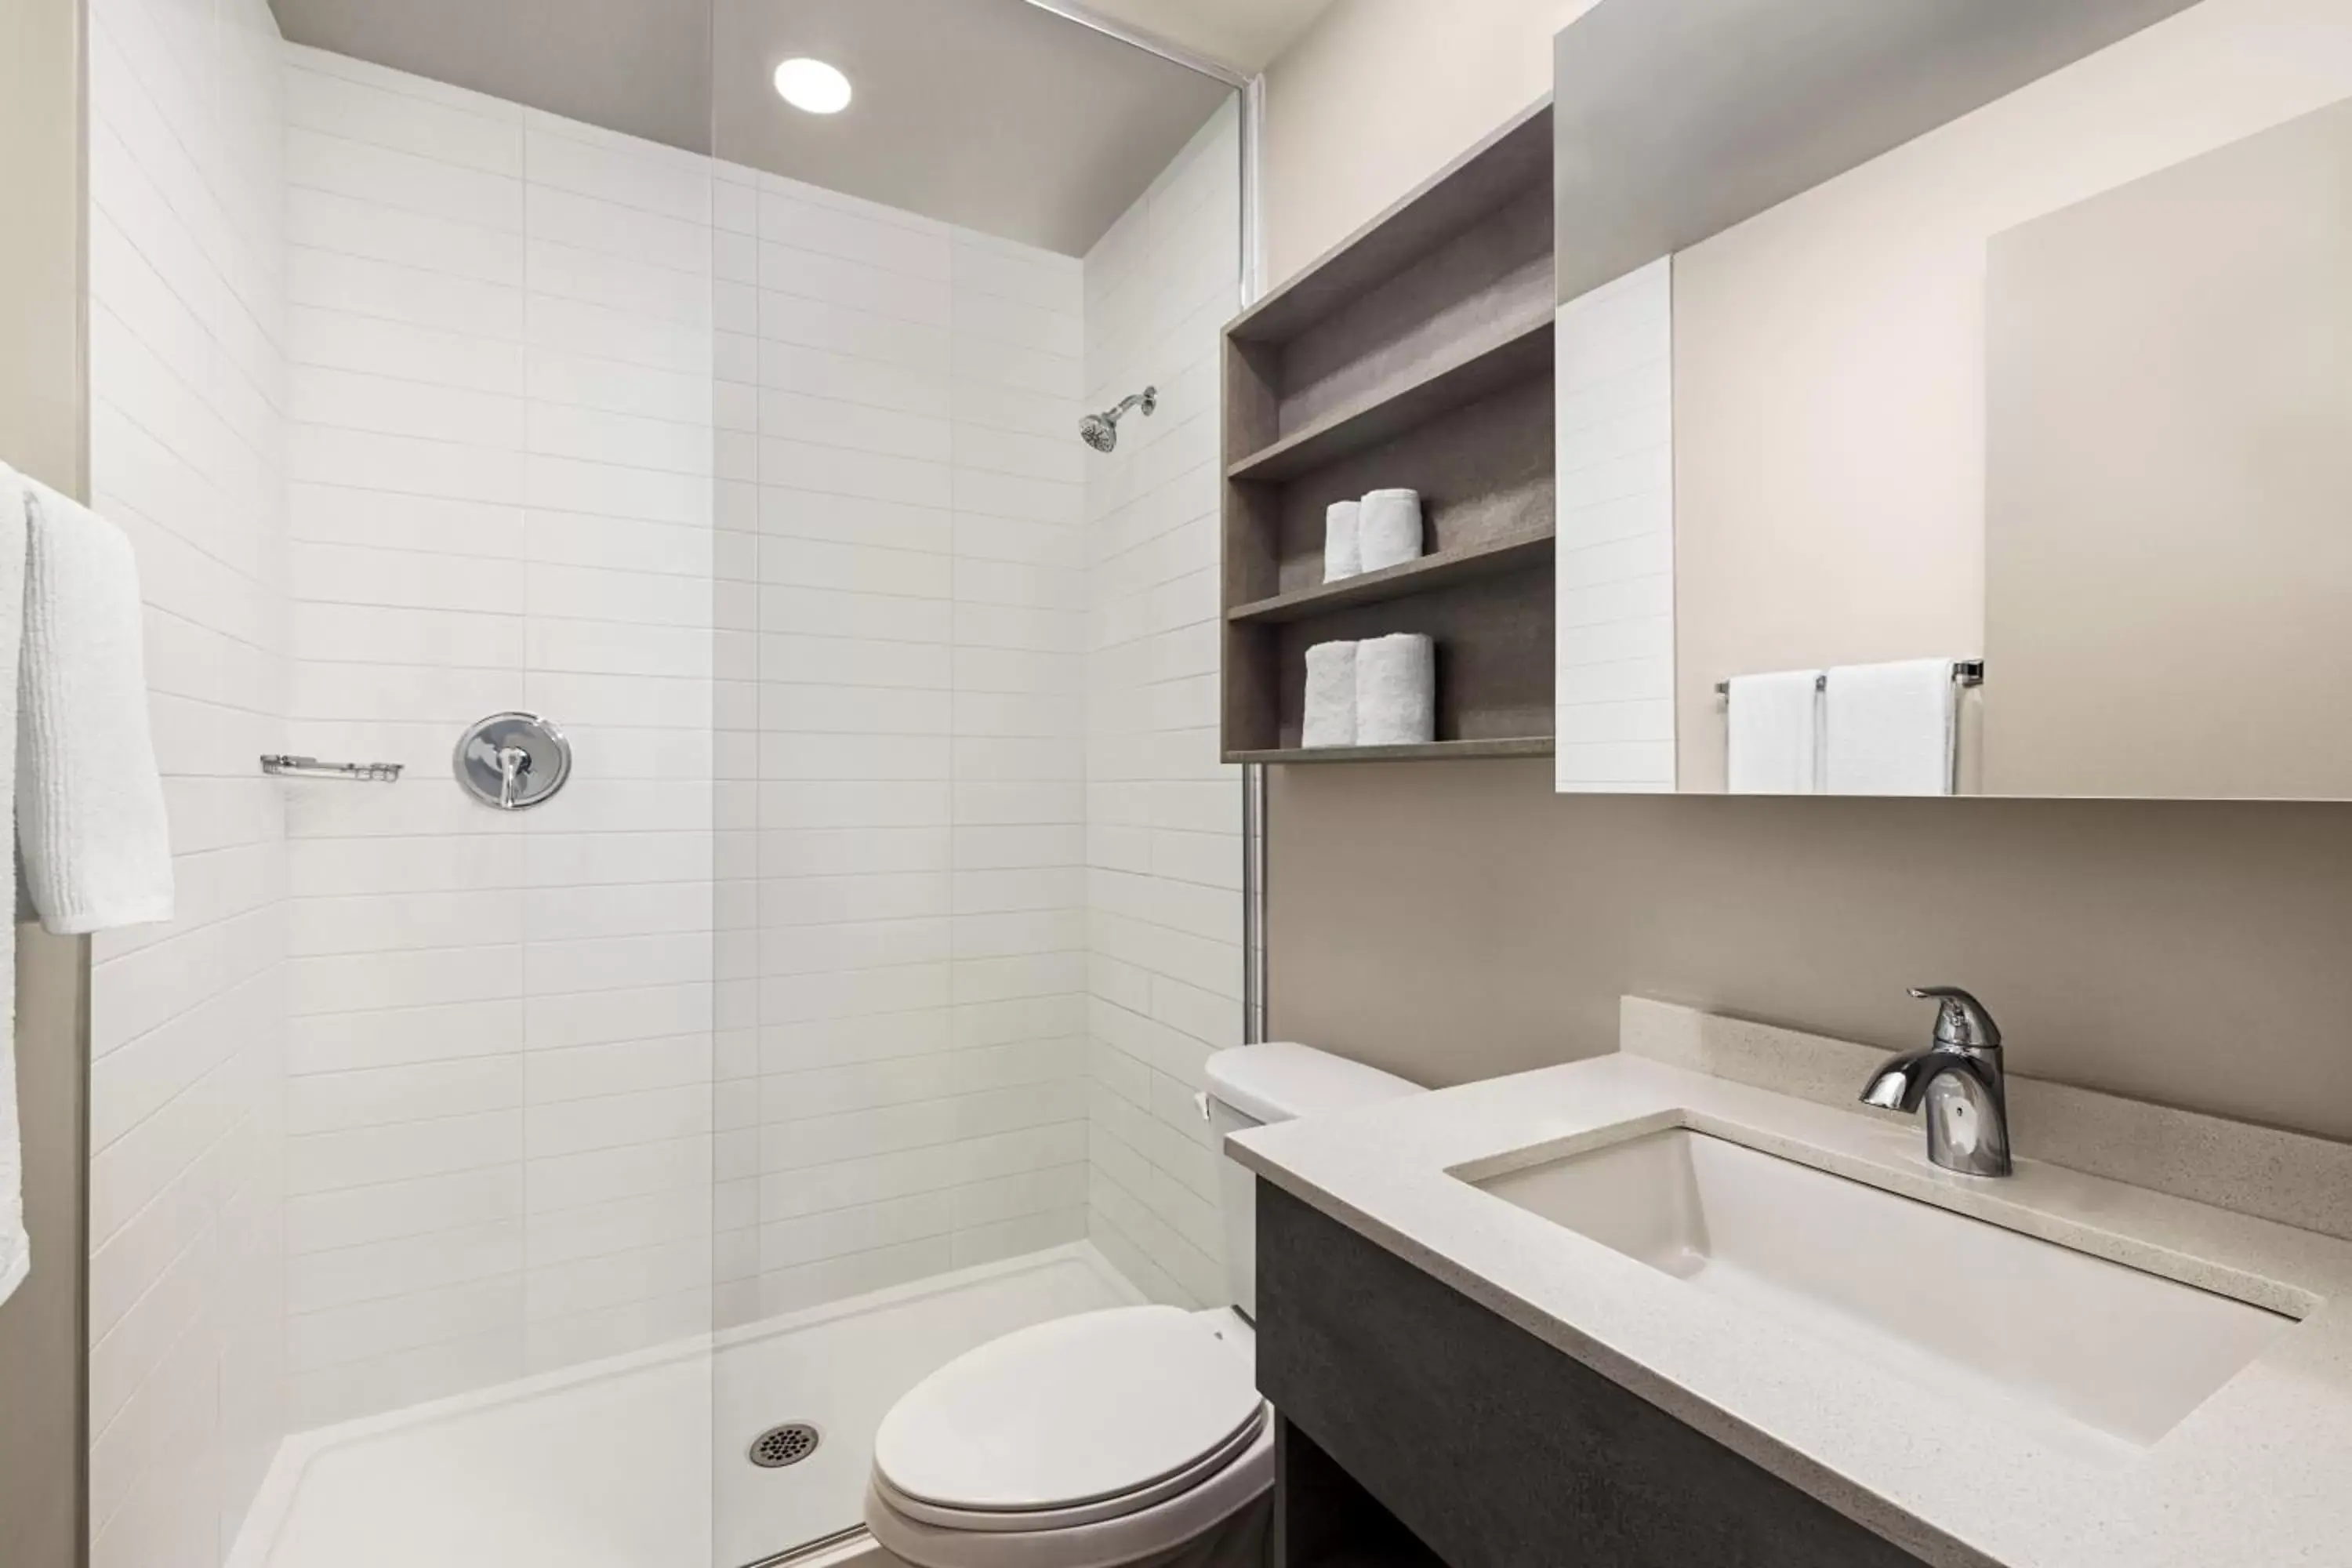 Shower, Bathroom in Microtel Inn & Suites Montreal Airport-Dorval QC